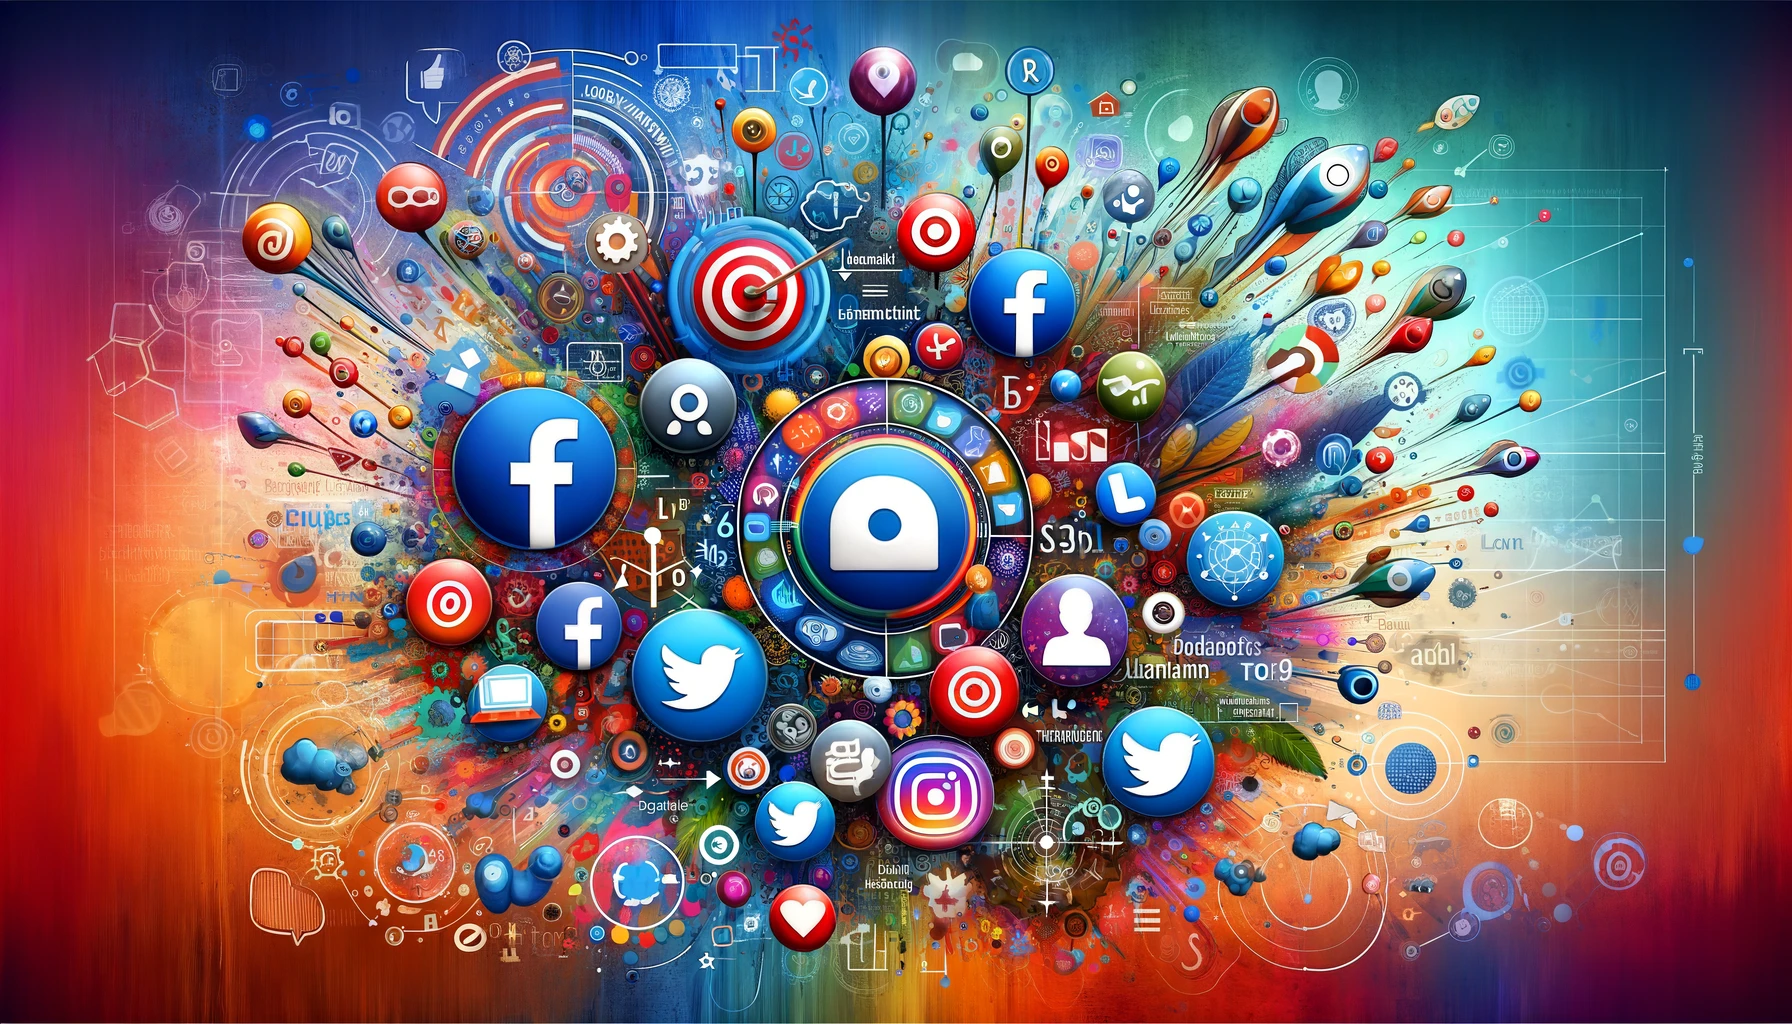 A lively composition representing 'Social Media Advertising' with icons of various platforms like Facebook, Instagram, Twitter, and LinkedIn surrounded by targeting symbols, demographic avatars, and engagement metrics.